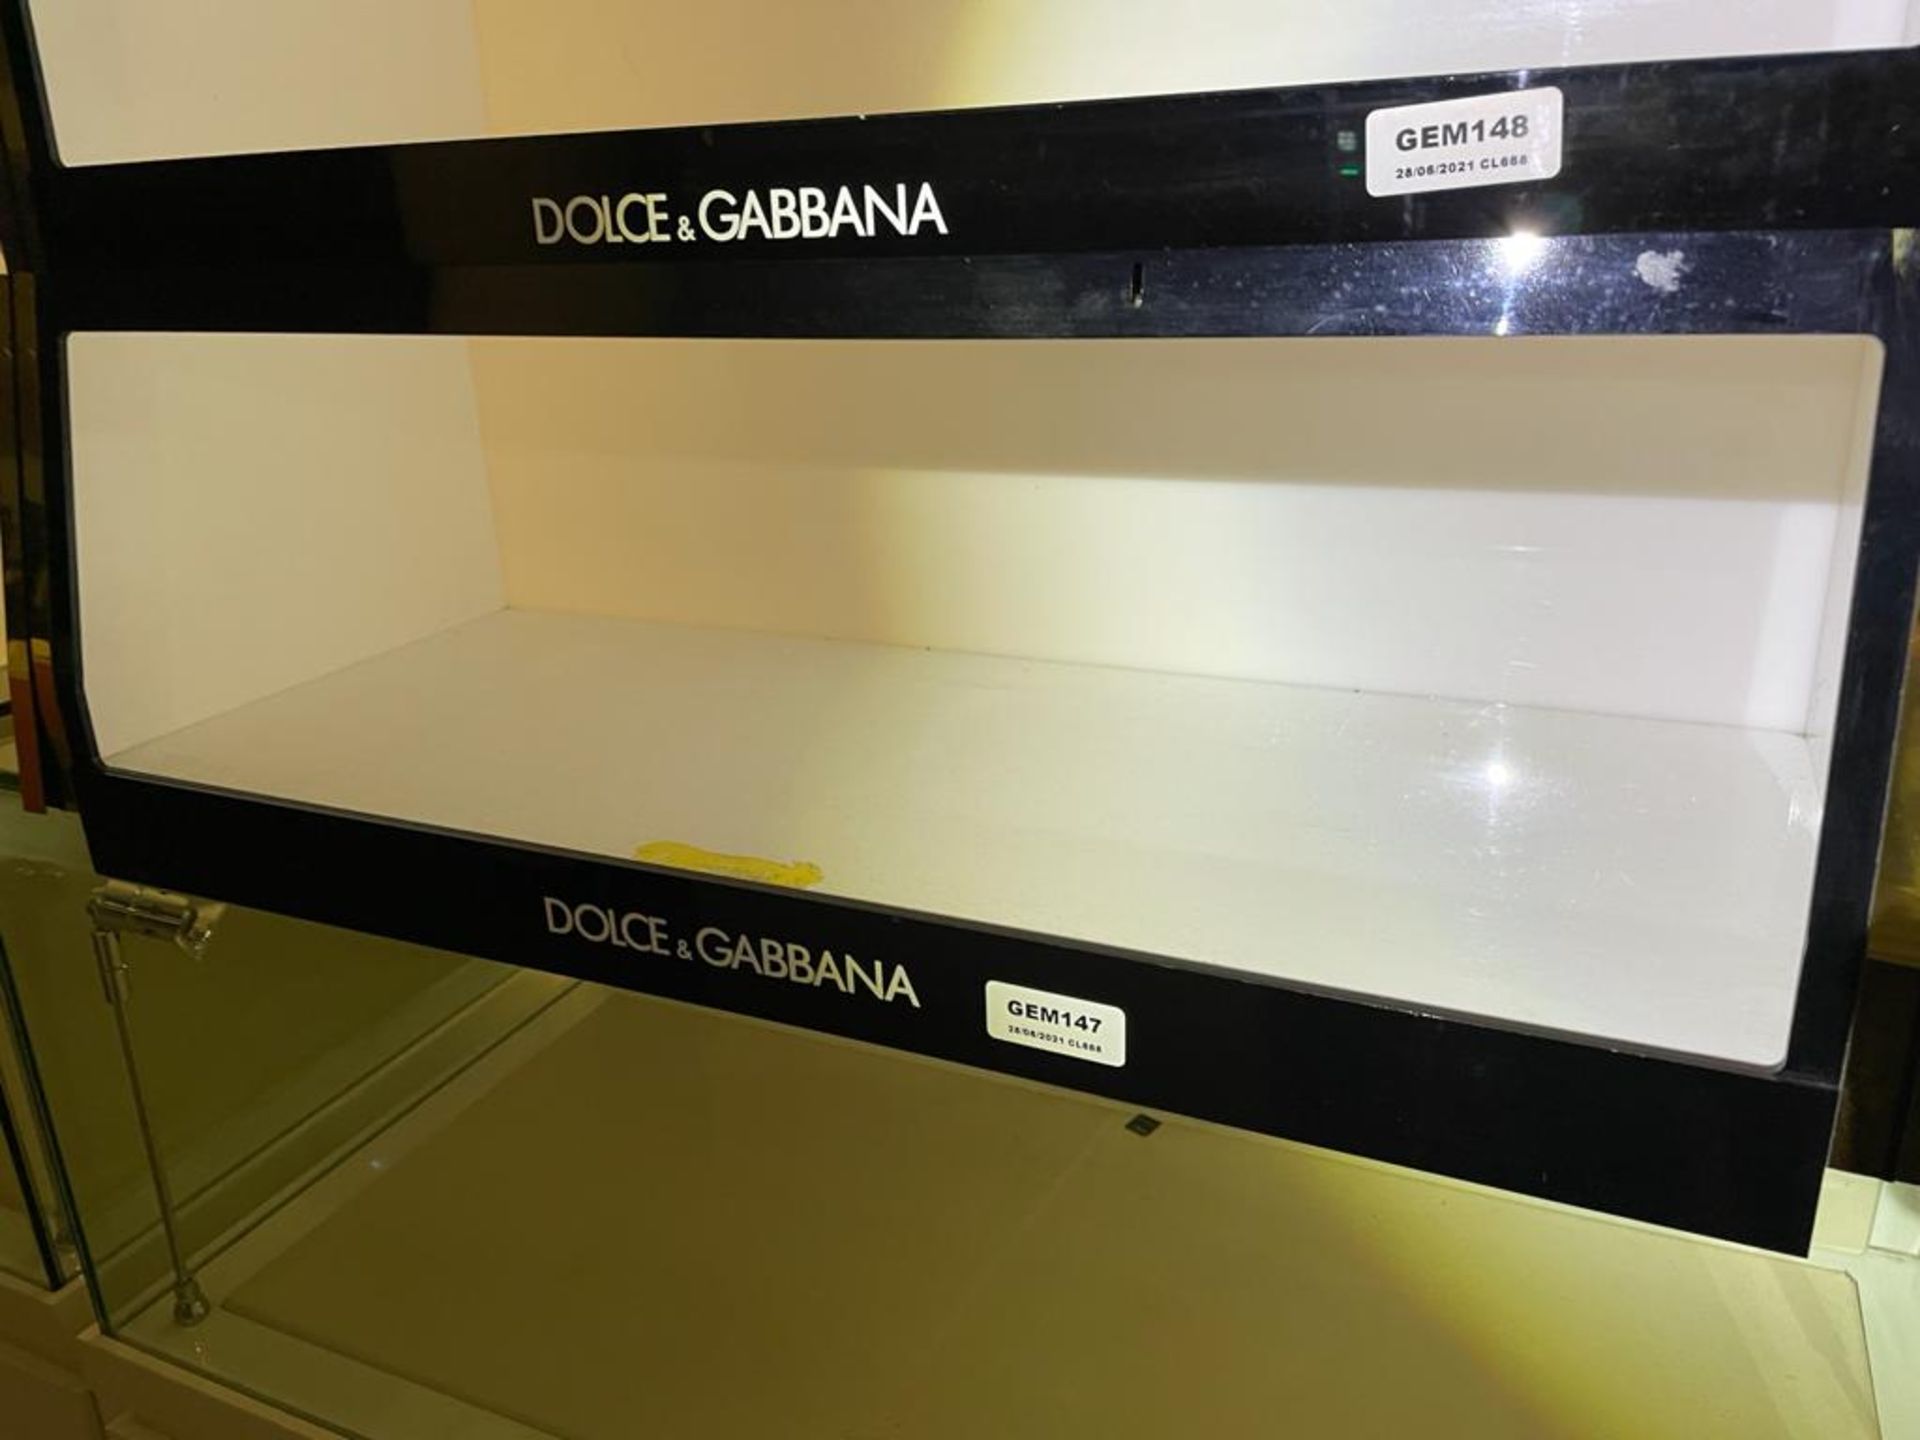 2 x Dolce & Gabbana Display Cases With Black Perspex Fascias - Size H24 x W77 x D30 cms - CL670 - - Image 8 of 10